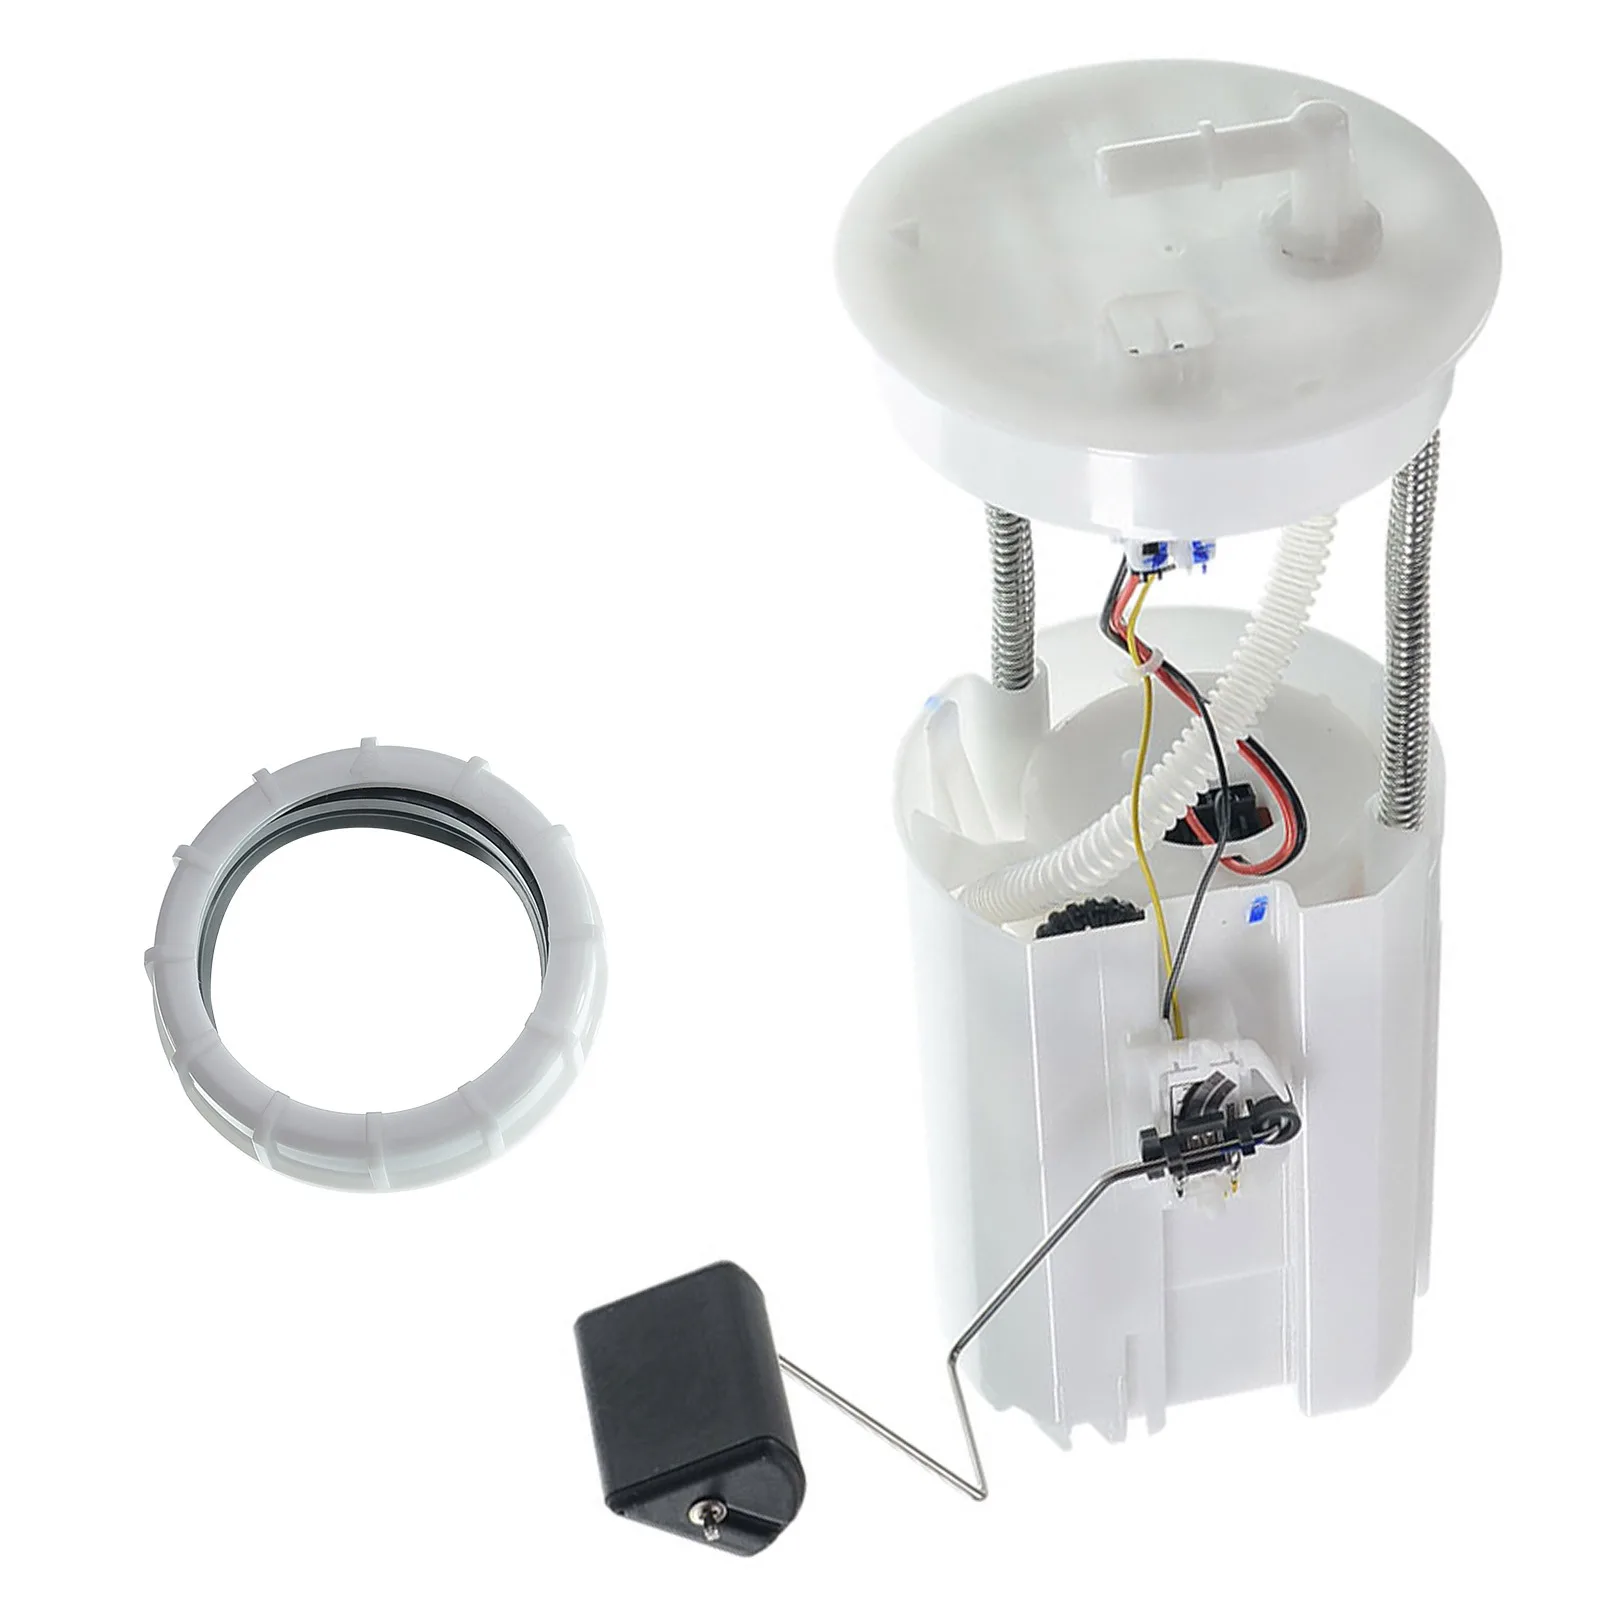 

In-stock CN US CA New Electrical Fuel Pump Module Assembly for Honda CR-V l4 2.4L 2007-2011 E8859M SP8025M